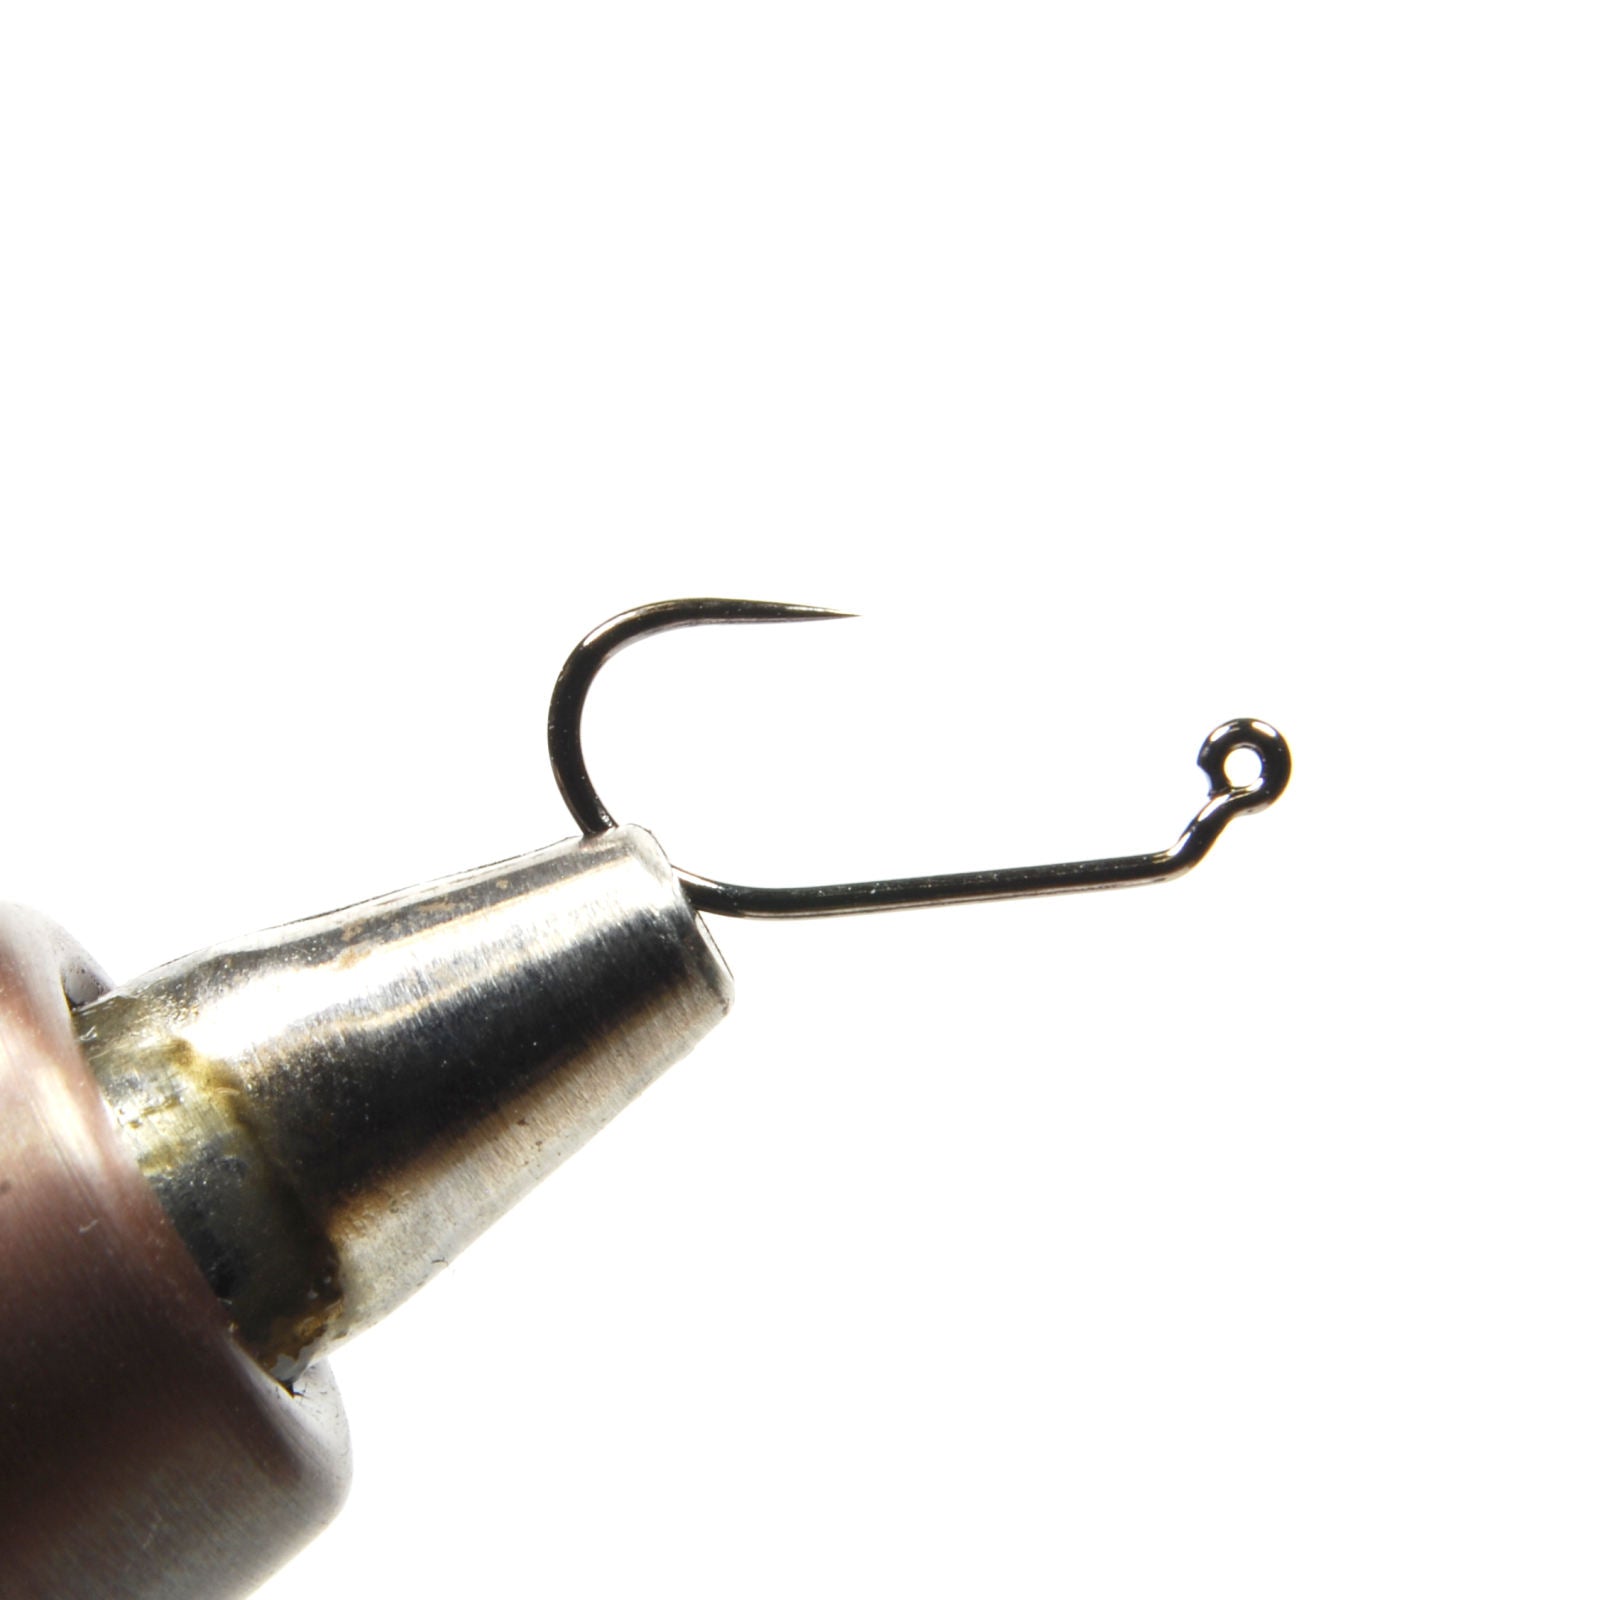 https://cdn.shopify.com/s/files/1/0211/7110/products/hanak-competition-fly-hooks-h400bl.jpg